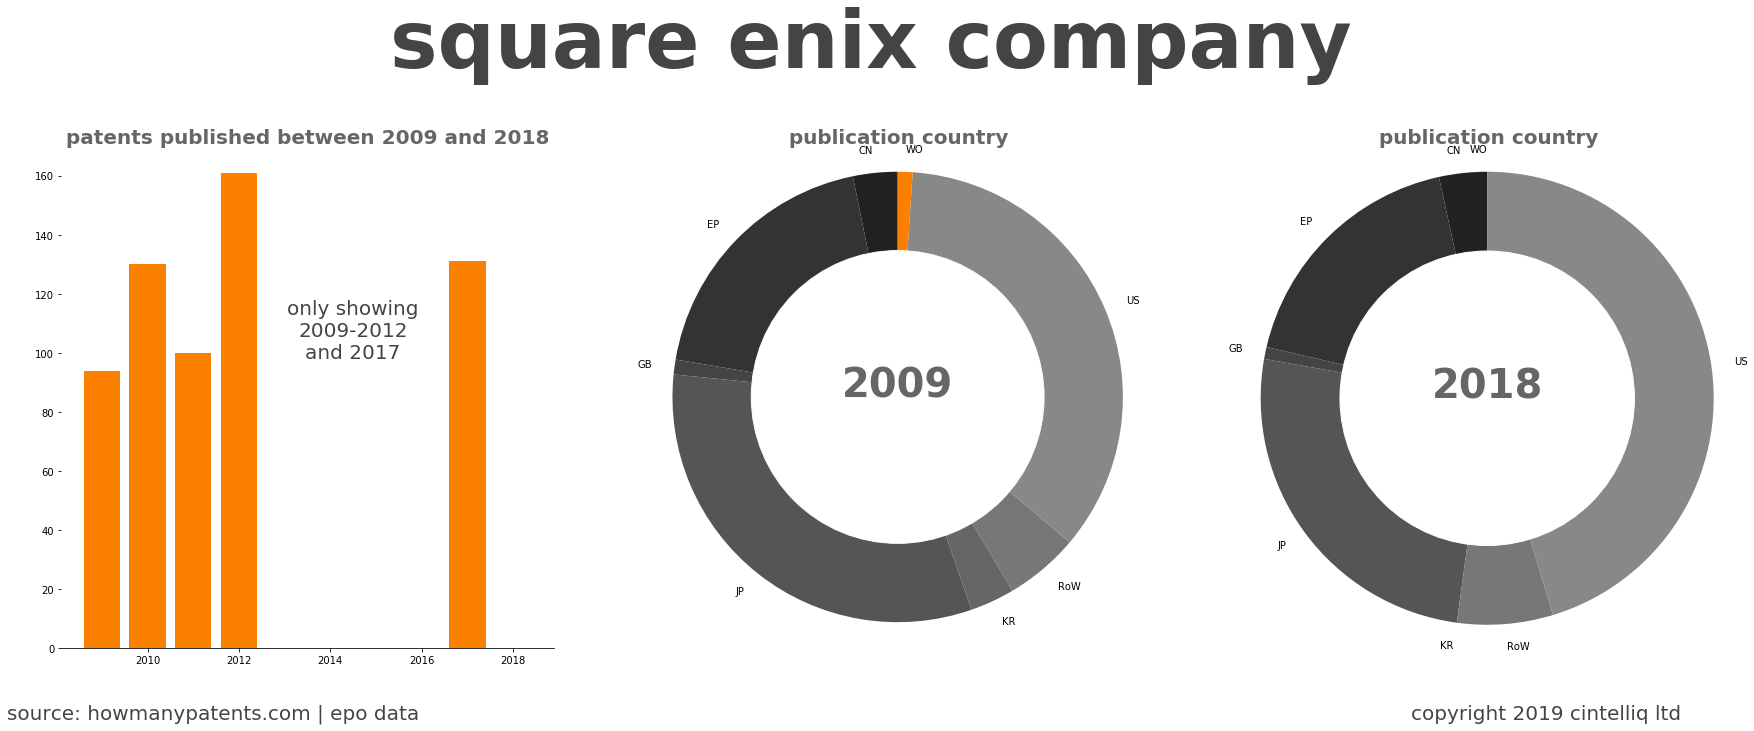 summary of patents for Square Enix Company